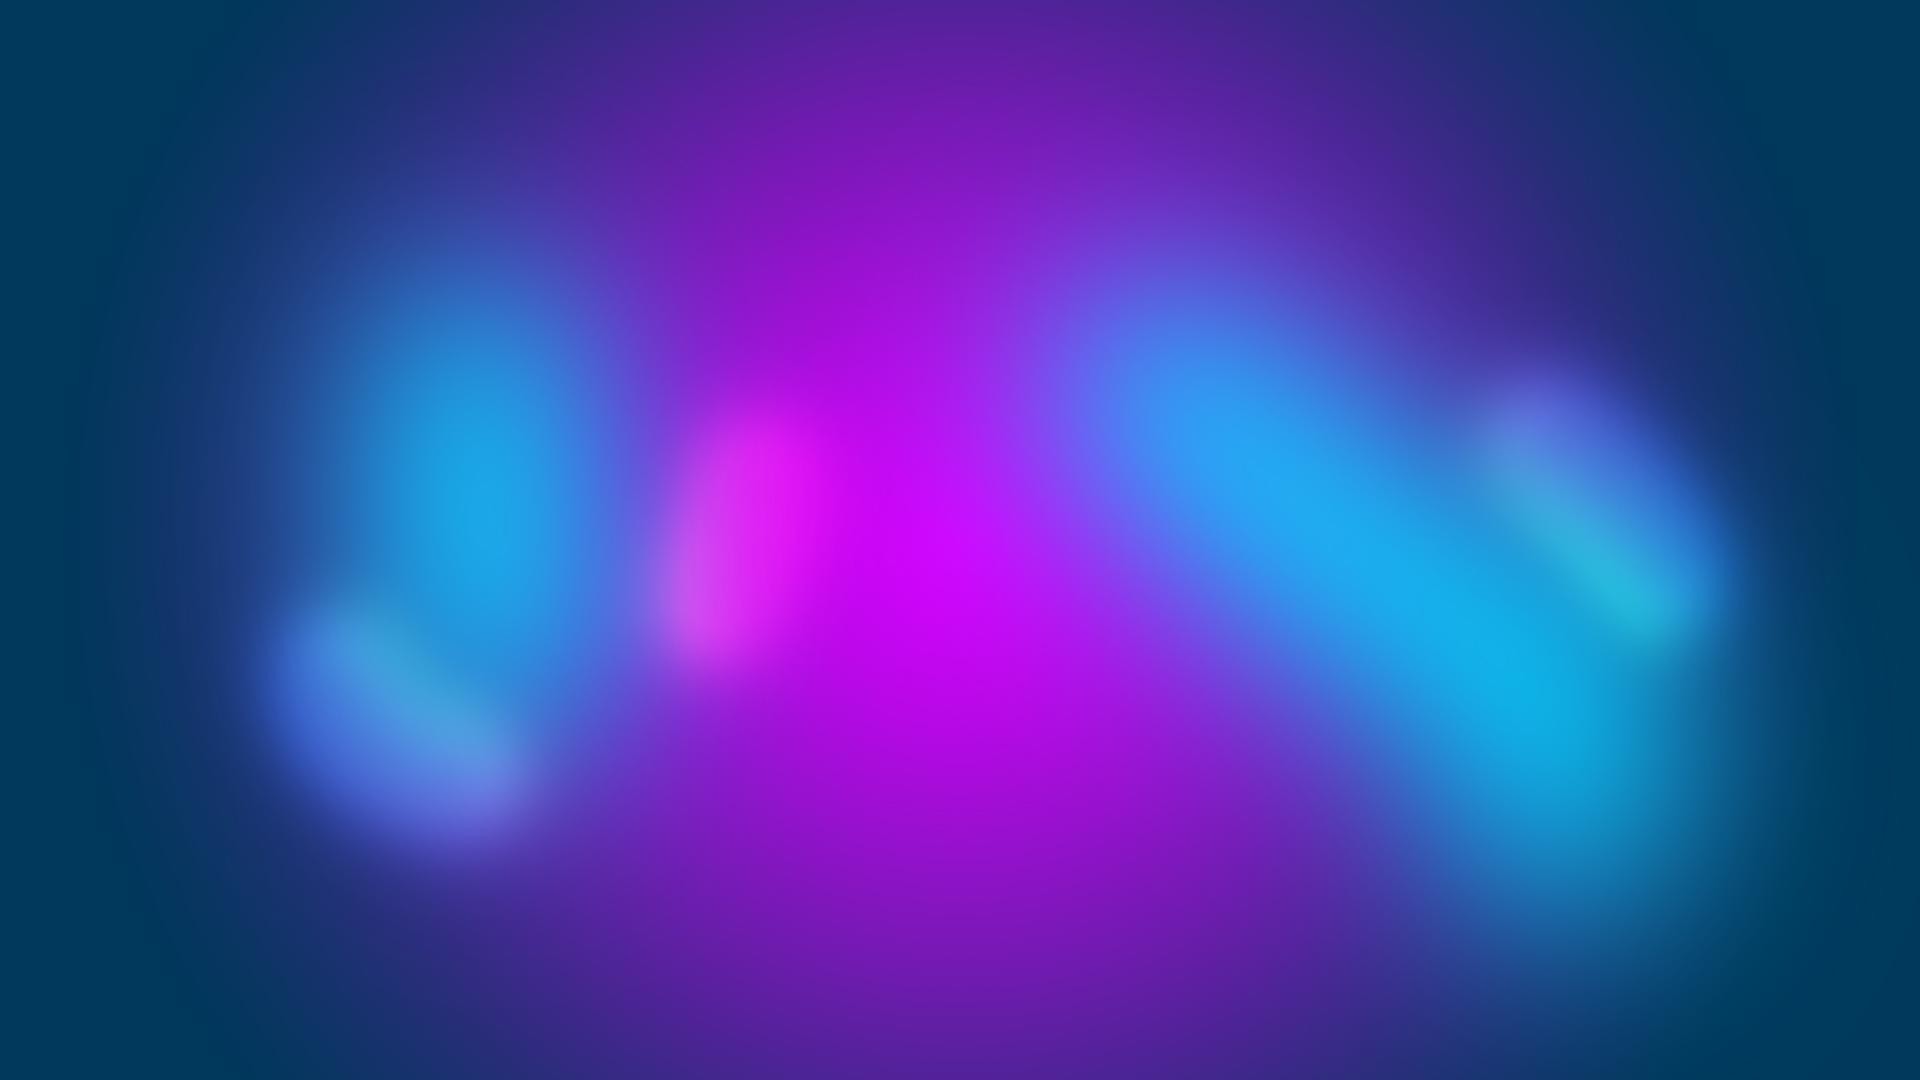 1920x1080  hd Violet blue theme background for computer wide  wallpapers:1280x800,1440x900,1680x1050